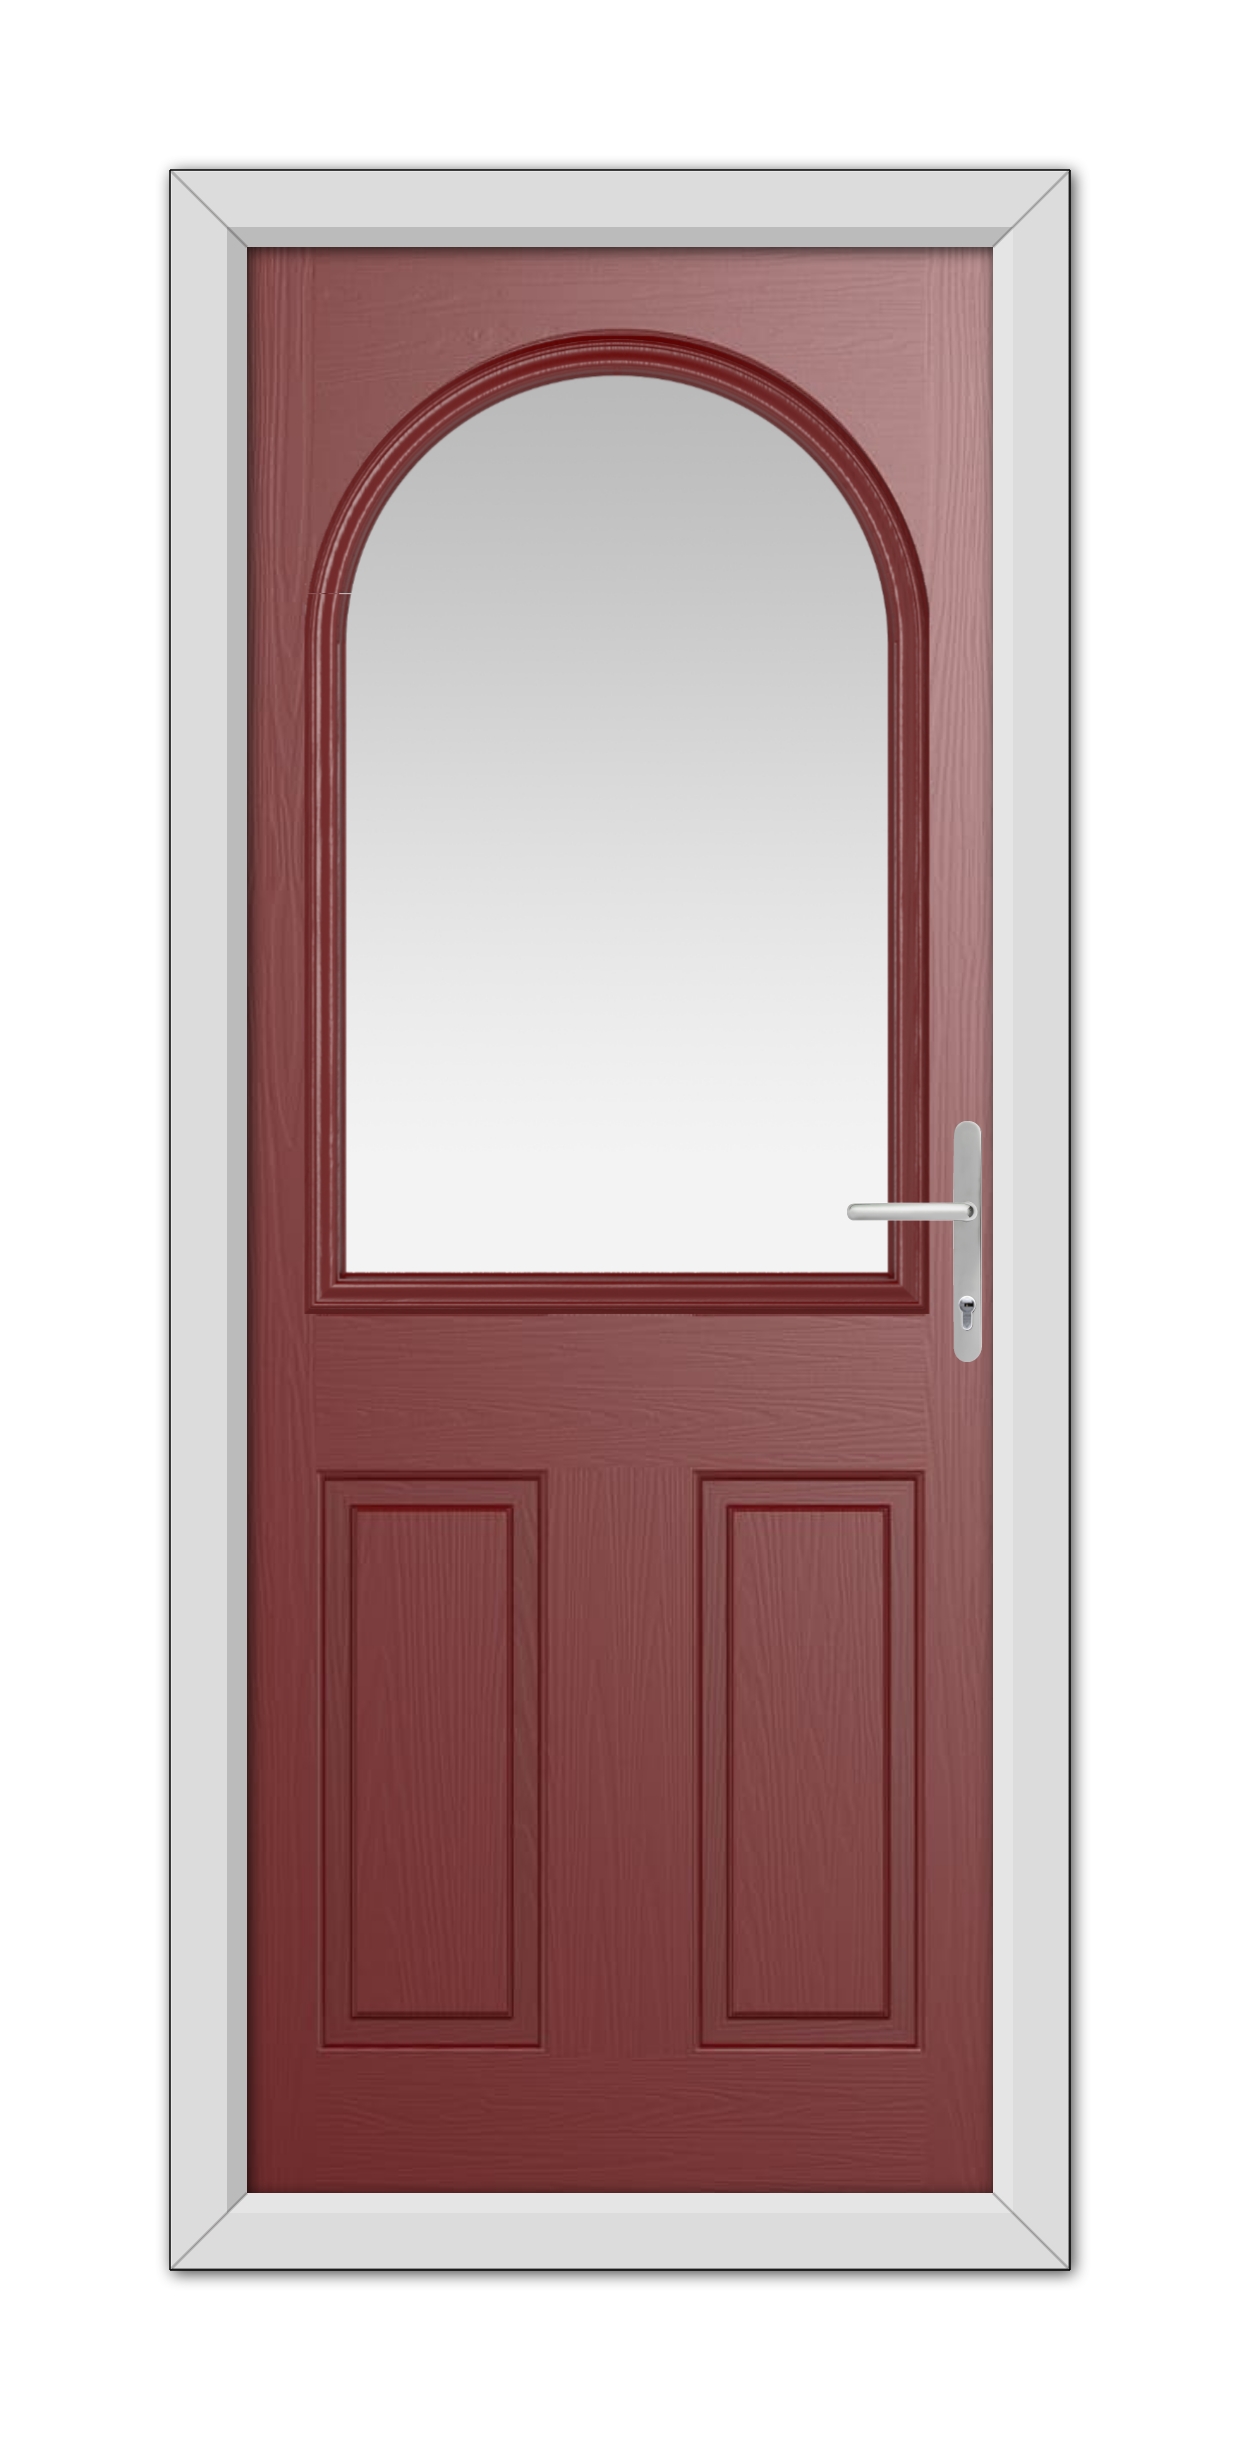 A Red Grafton Composite Door 48mm Timber Core with an arched window at the top, featuring a white frame and a metal handle, isolated on a white background.